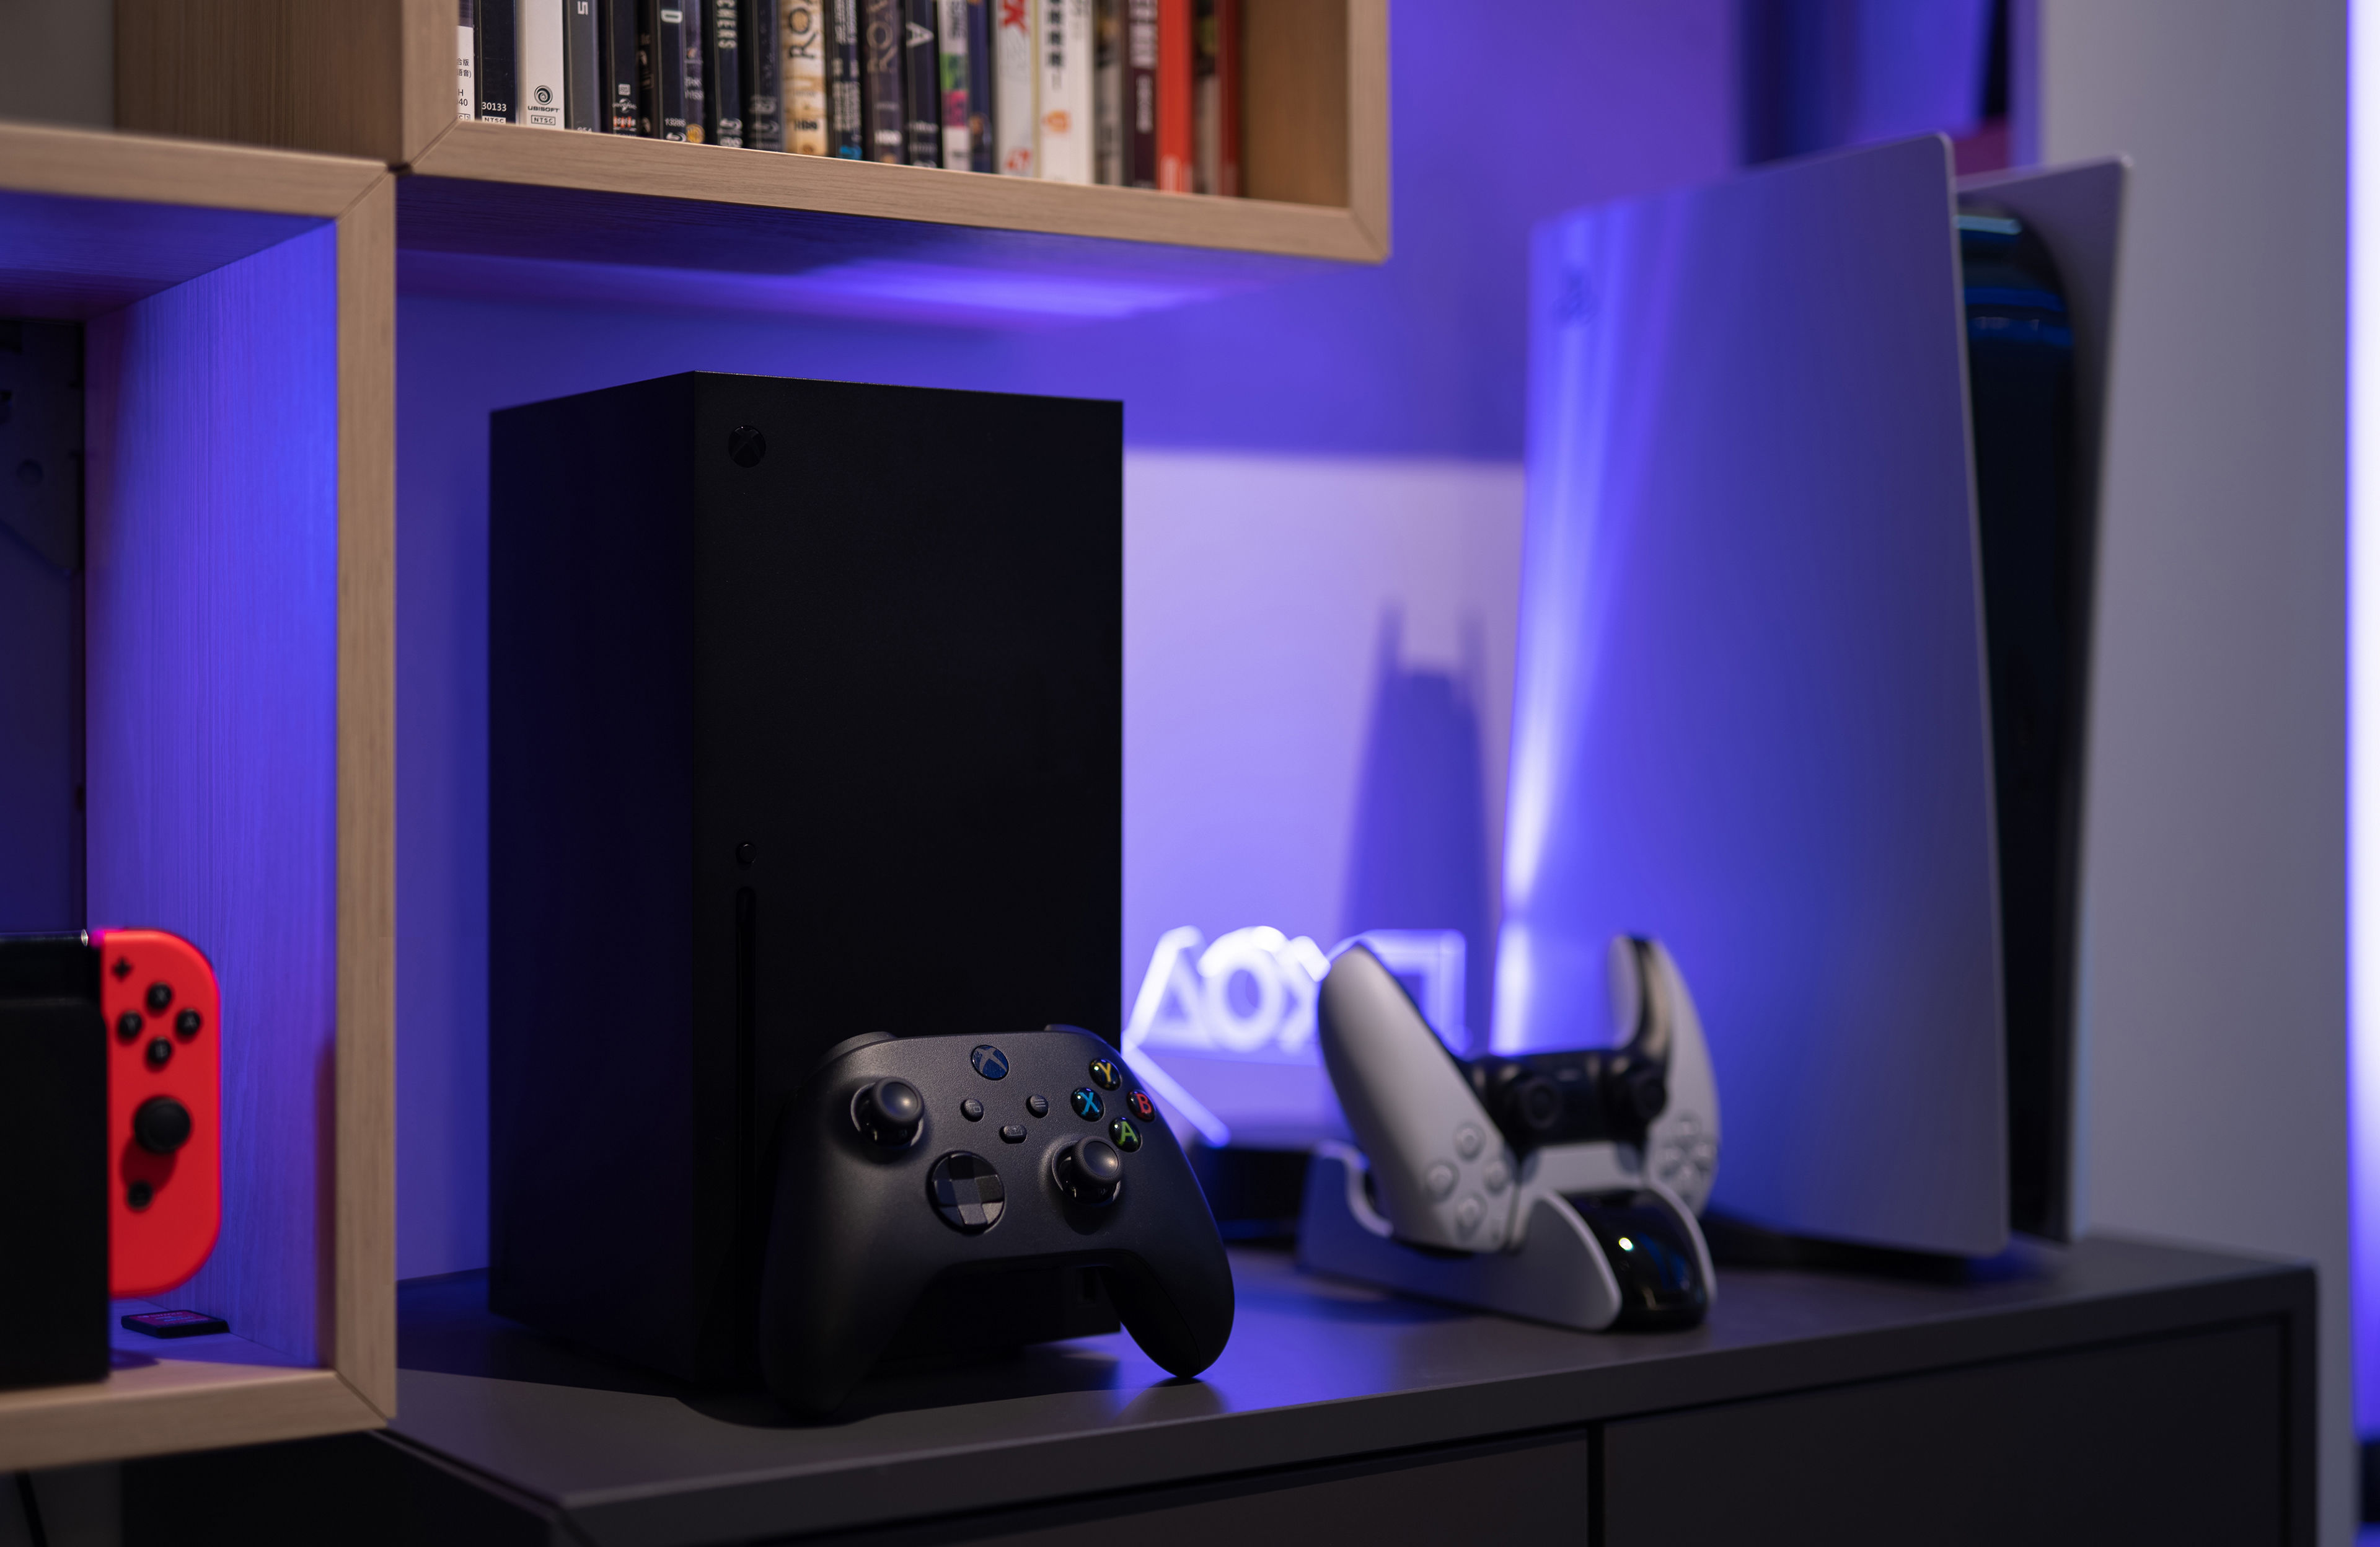 How to Set Up a Gaming Room at Home: 5 Essentials You Need